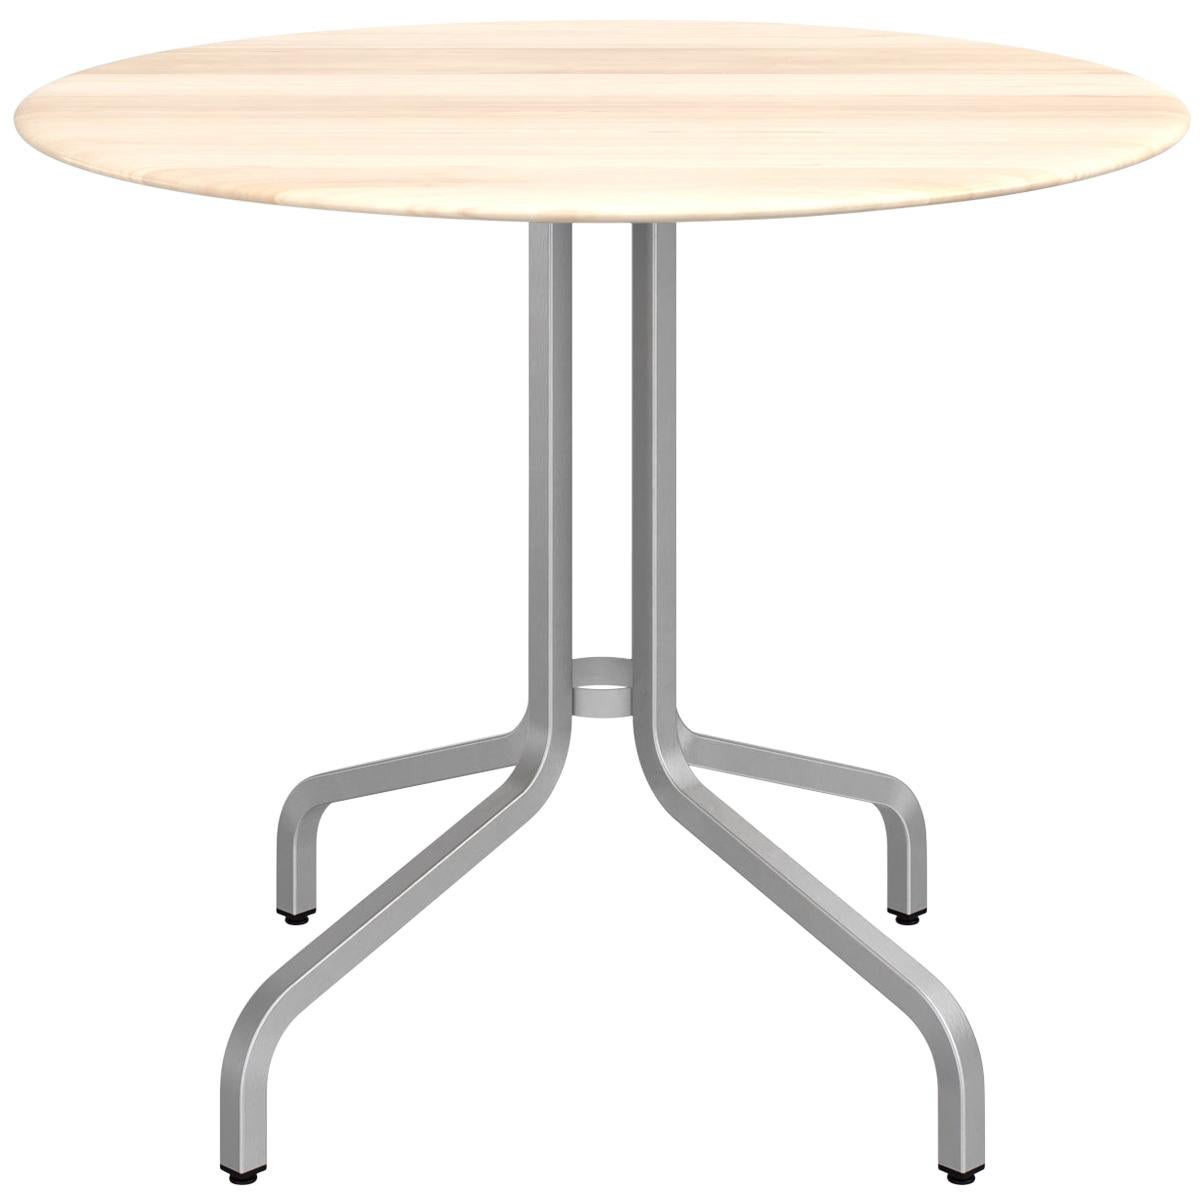 Emeco 1 Inch Large Round Aluminum Cafe Table with Wood Top by Jasper Morrison